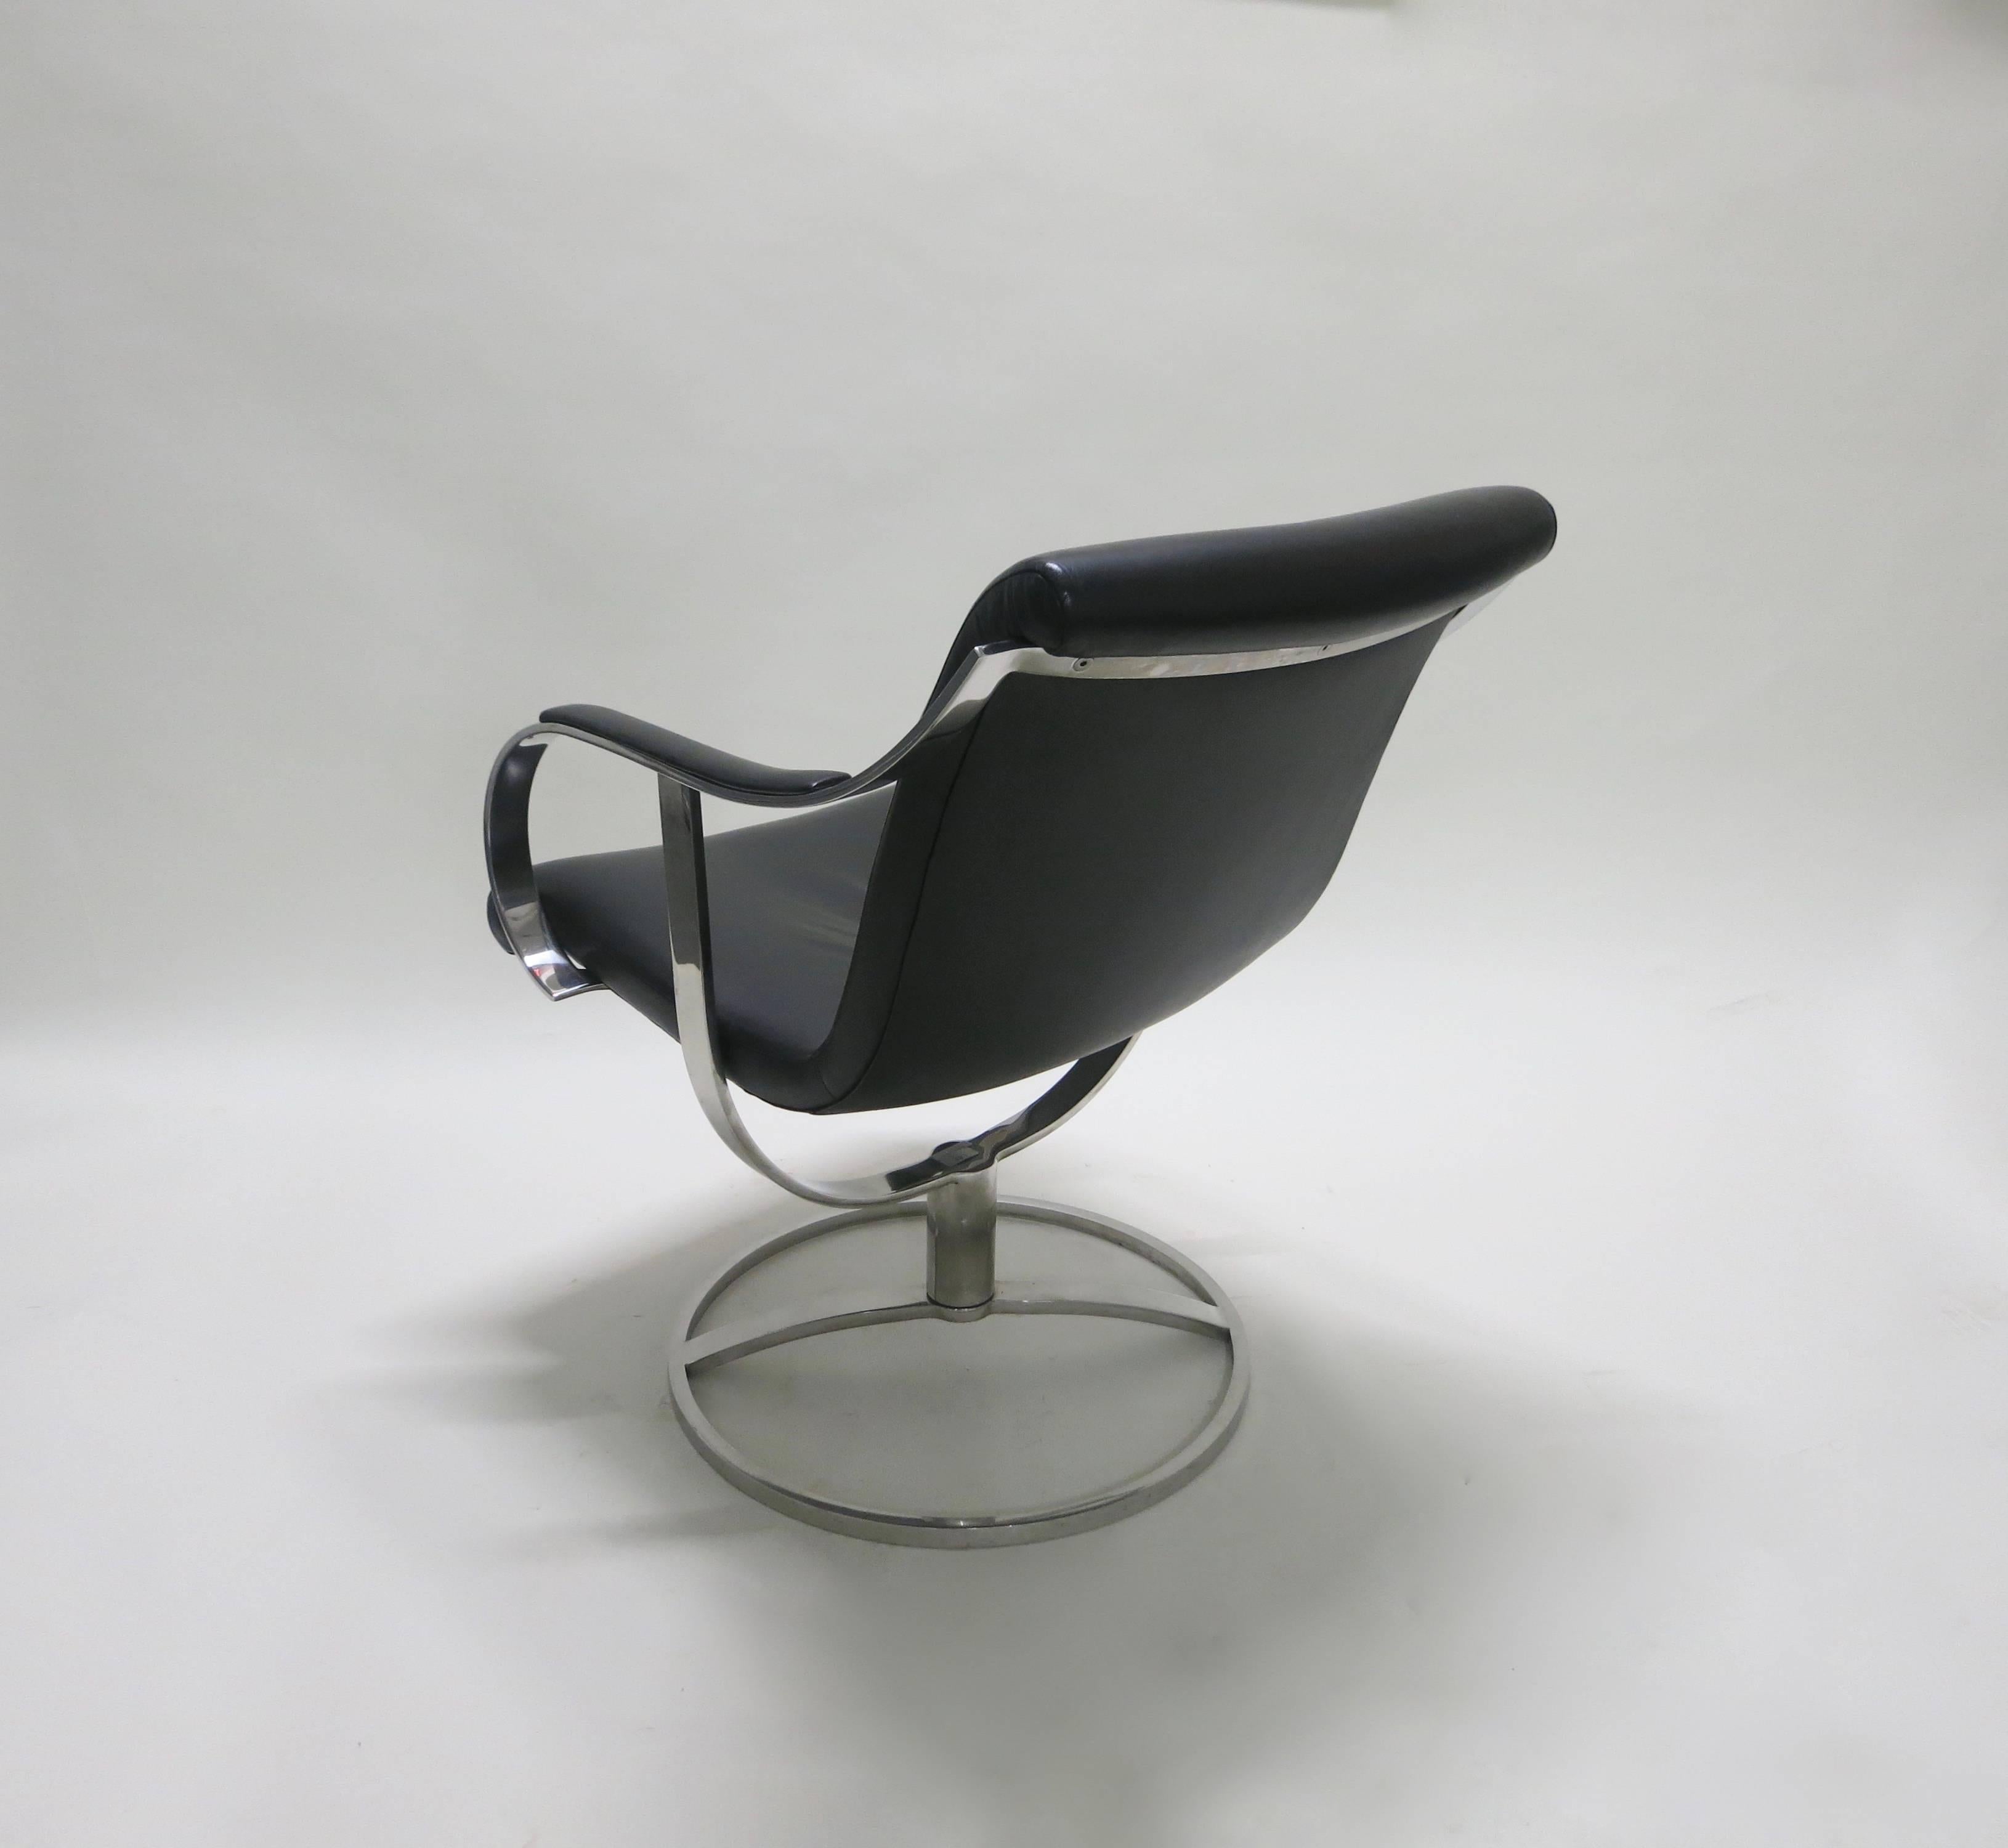 Pair of Swivel Chairs by Gardner Leaver for Steelcase, circa 1965, American 2